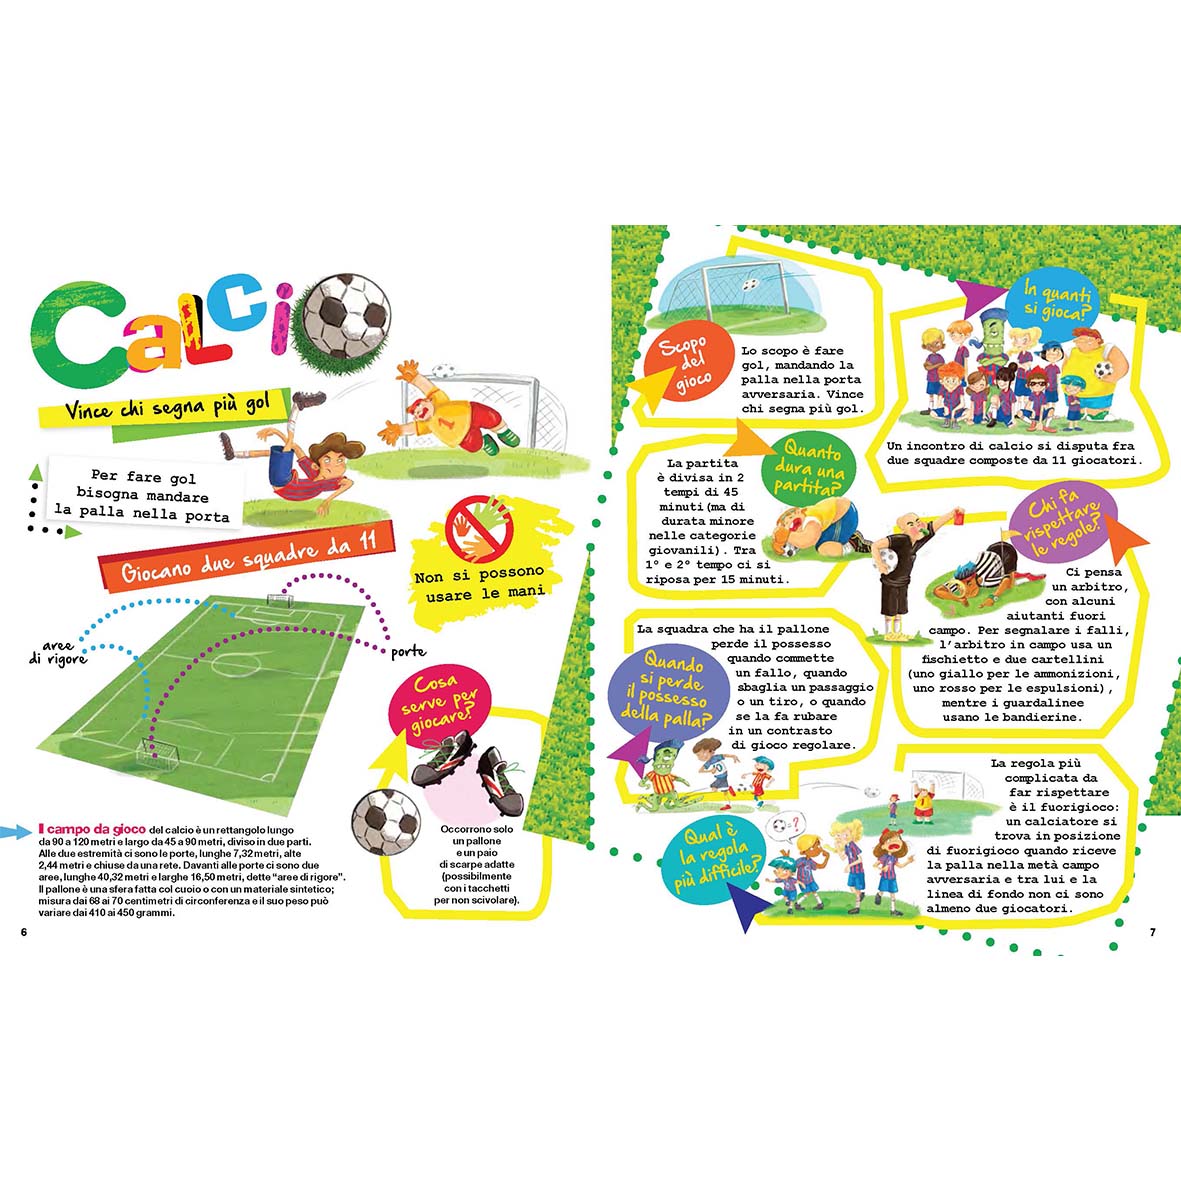 Sports explained to children - Small illustrated guide